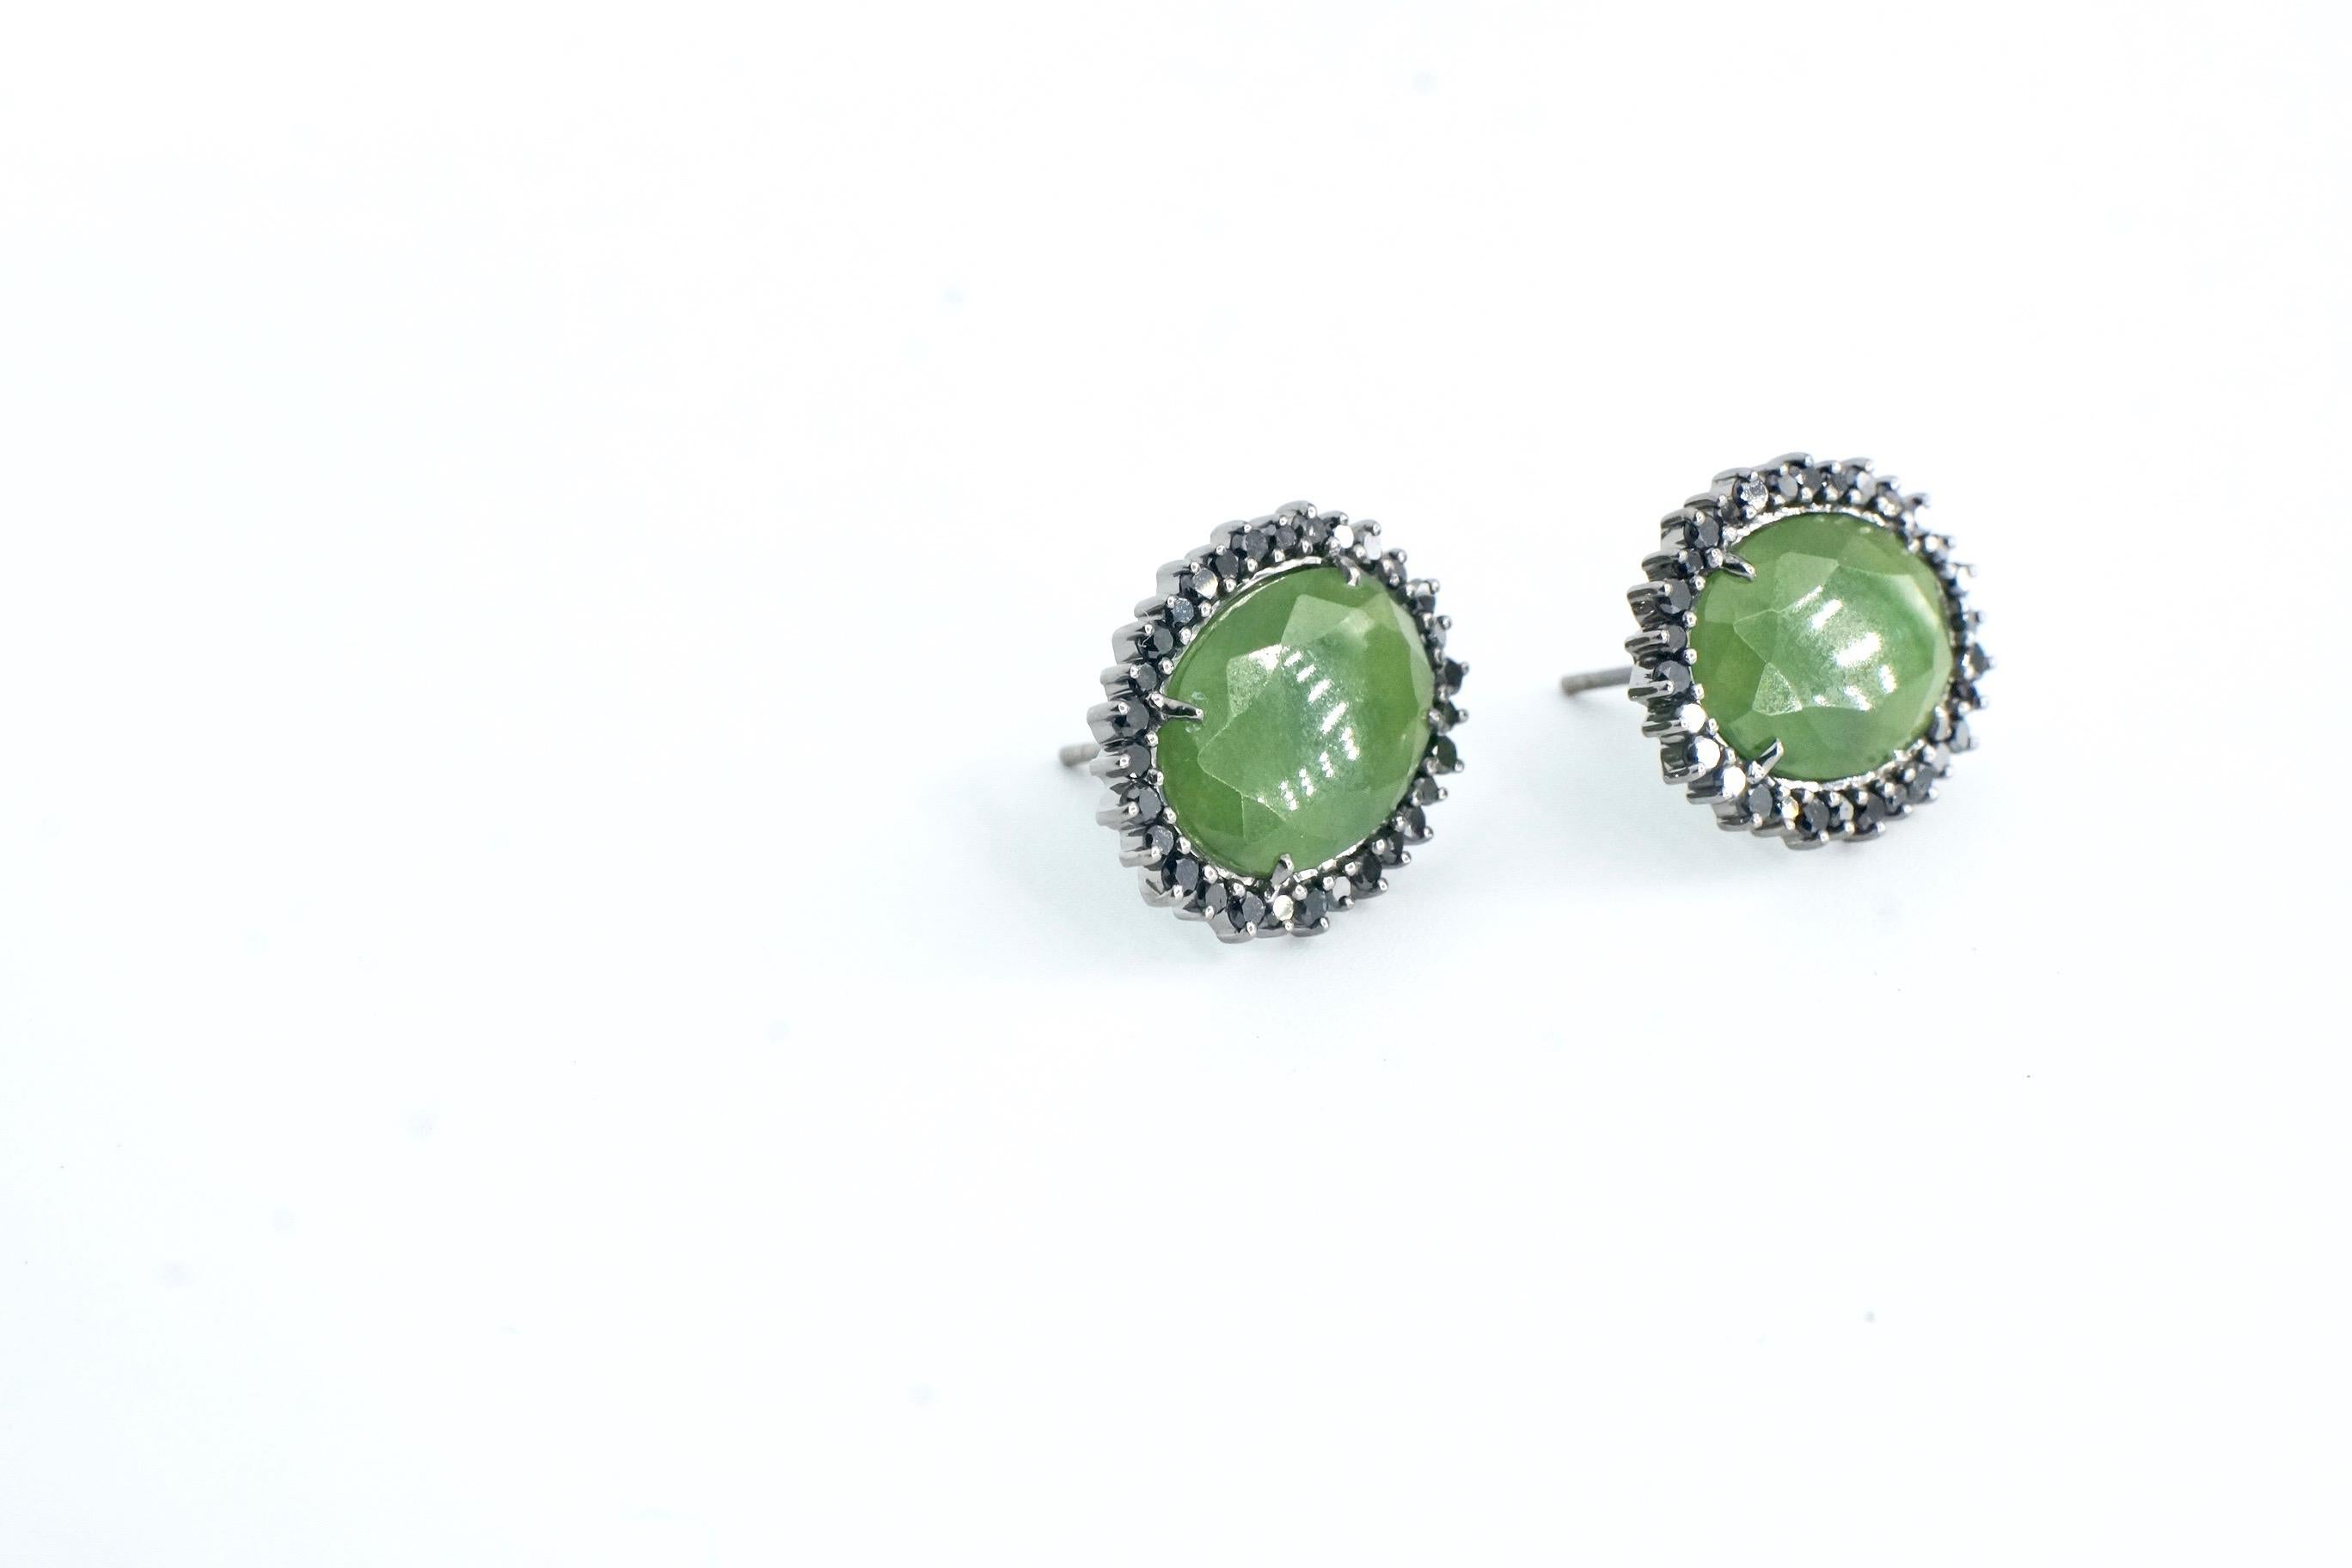 Jade Martha Studs
A pair of eighteen-karat blackened white gold earrings consisting of an oval faceted green jade surrounded by black diamonds. 
Total Black Diamond Weight – 0.97 ct.
Total Jade Weight – 7.31 cts.
This piece is one-of-a-kind and